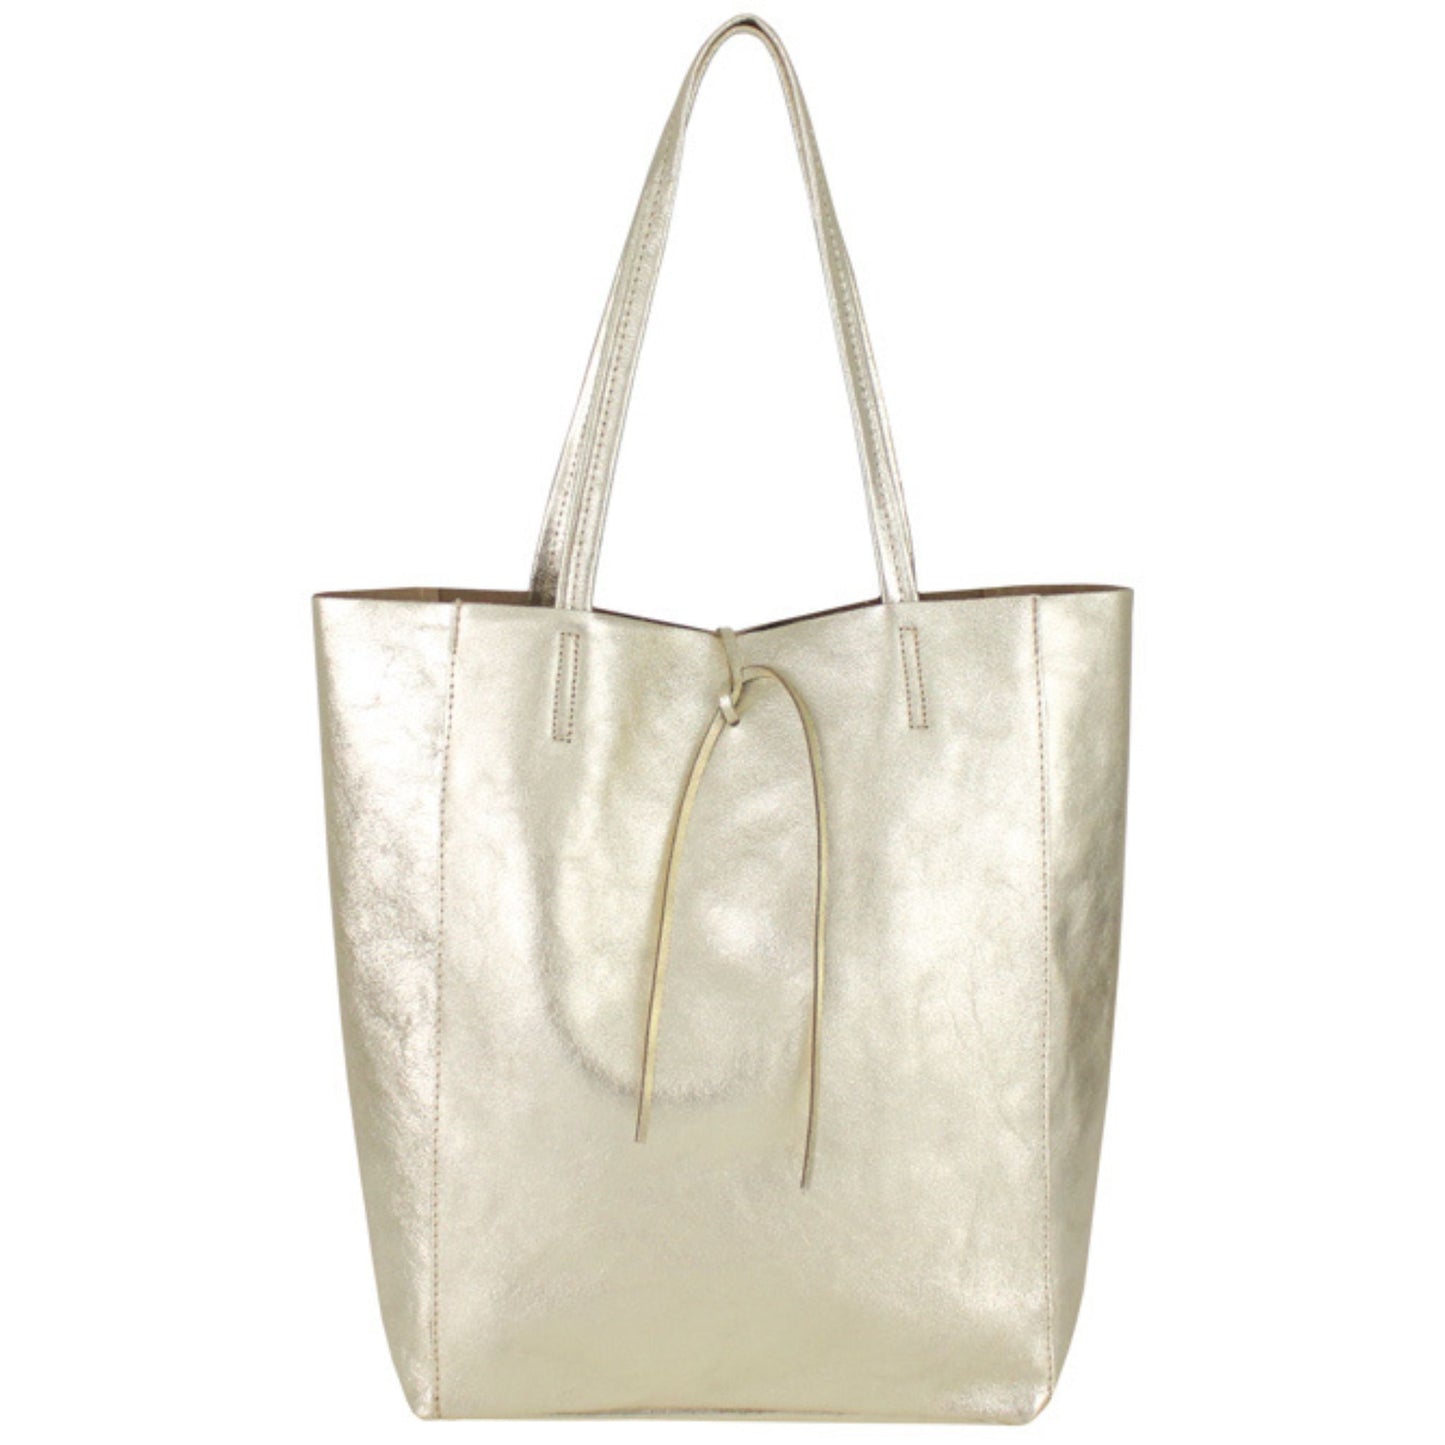 The Leather Shopper Bag